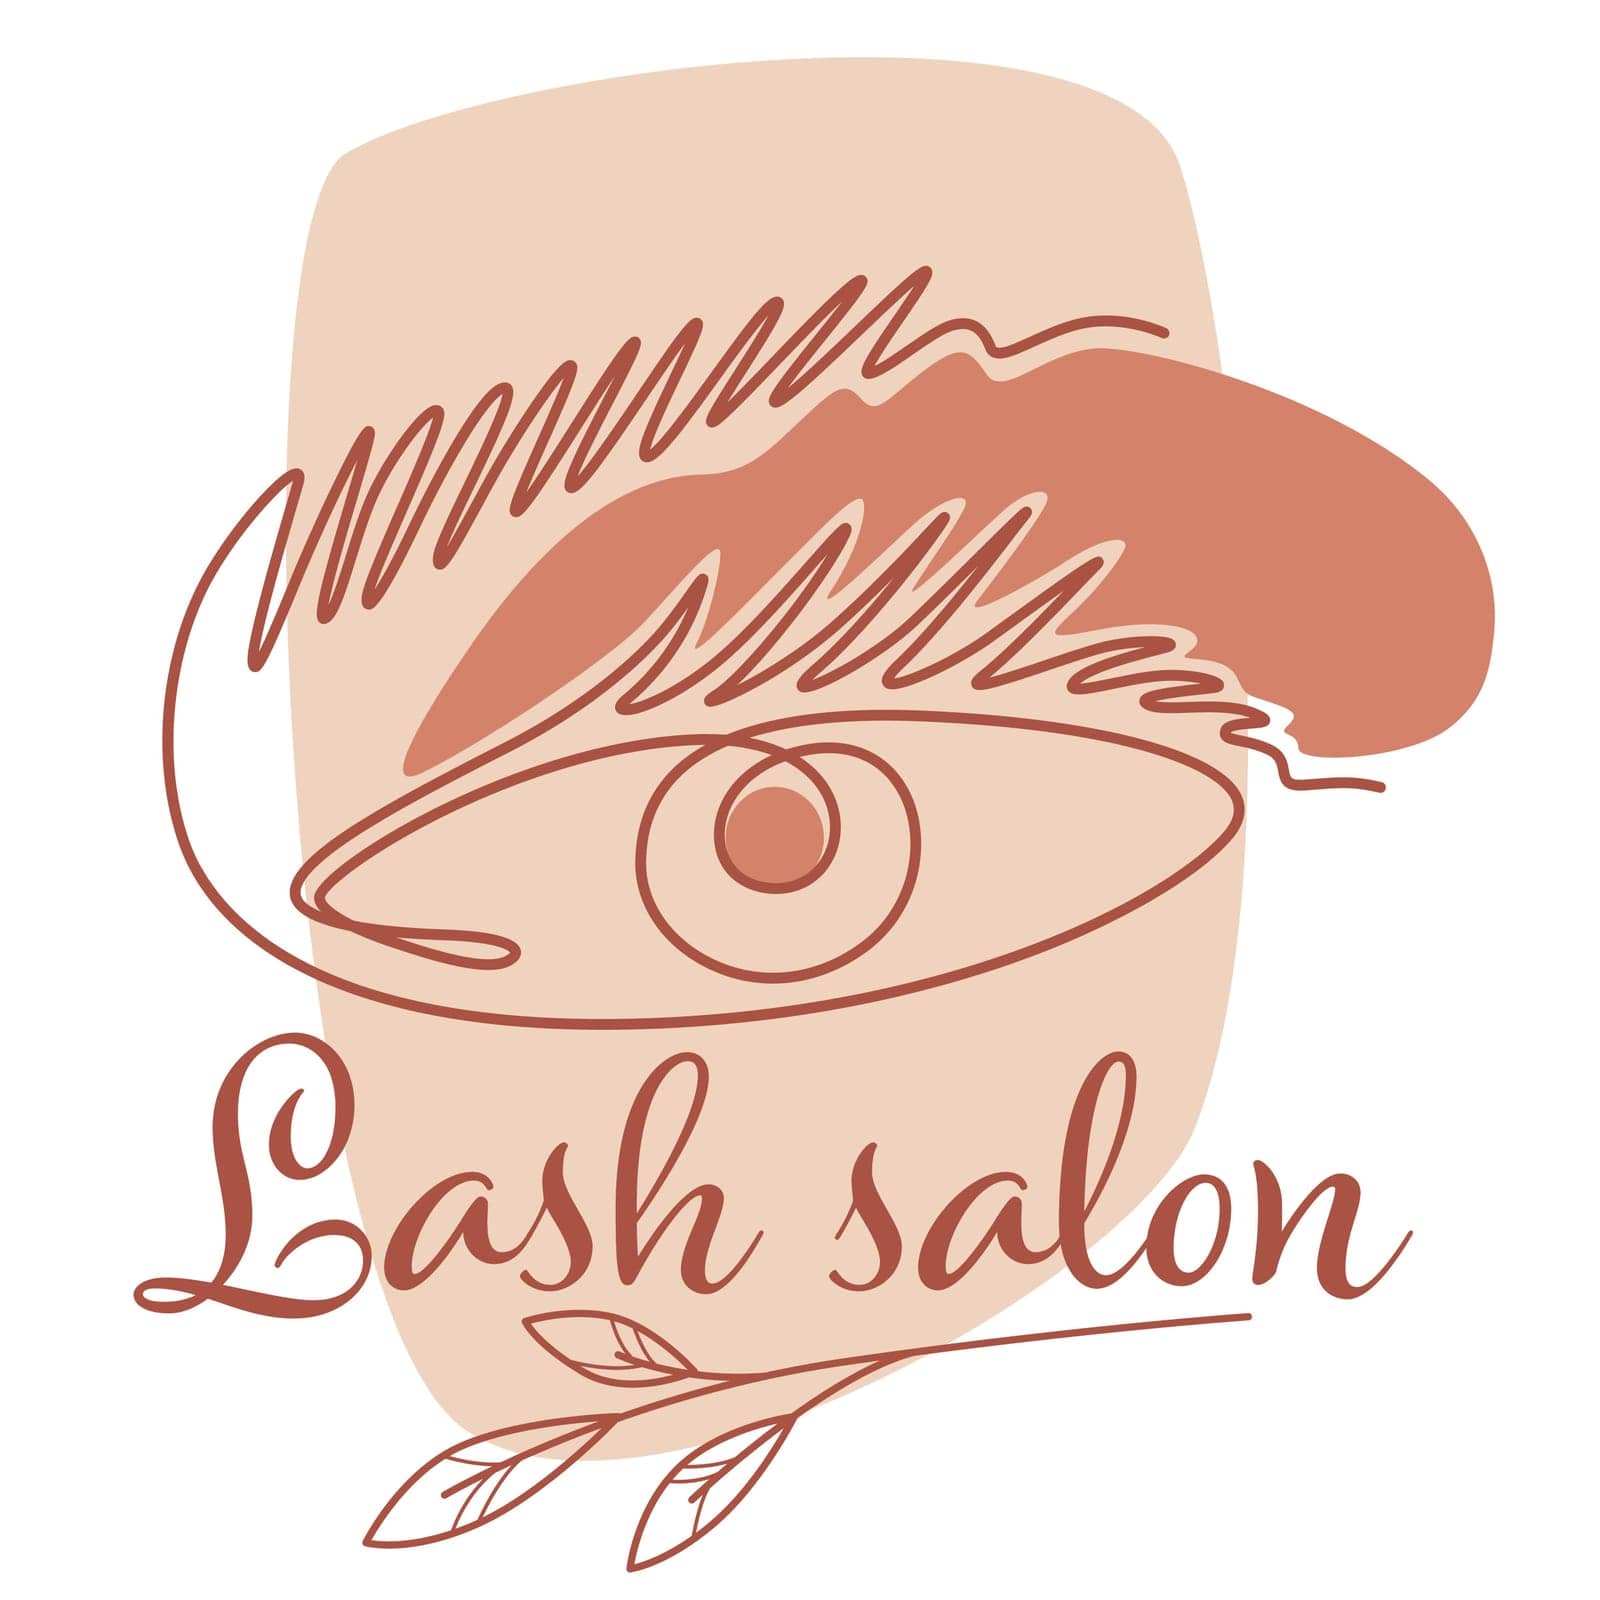 Lash salon and care of eyelashes and brows vector by Sonulkaster